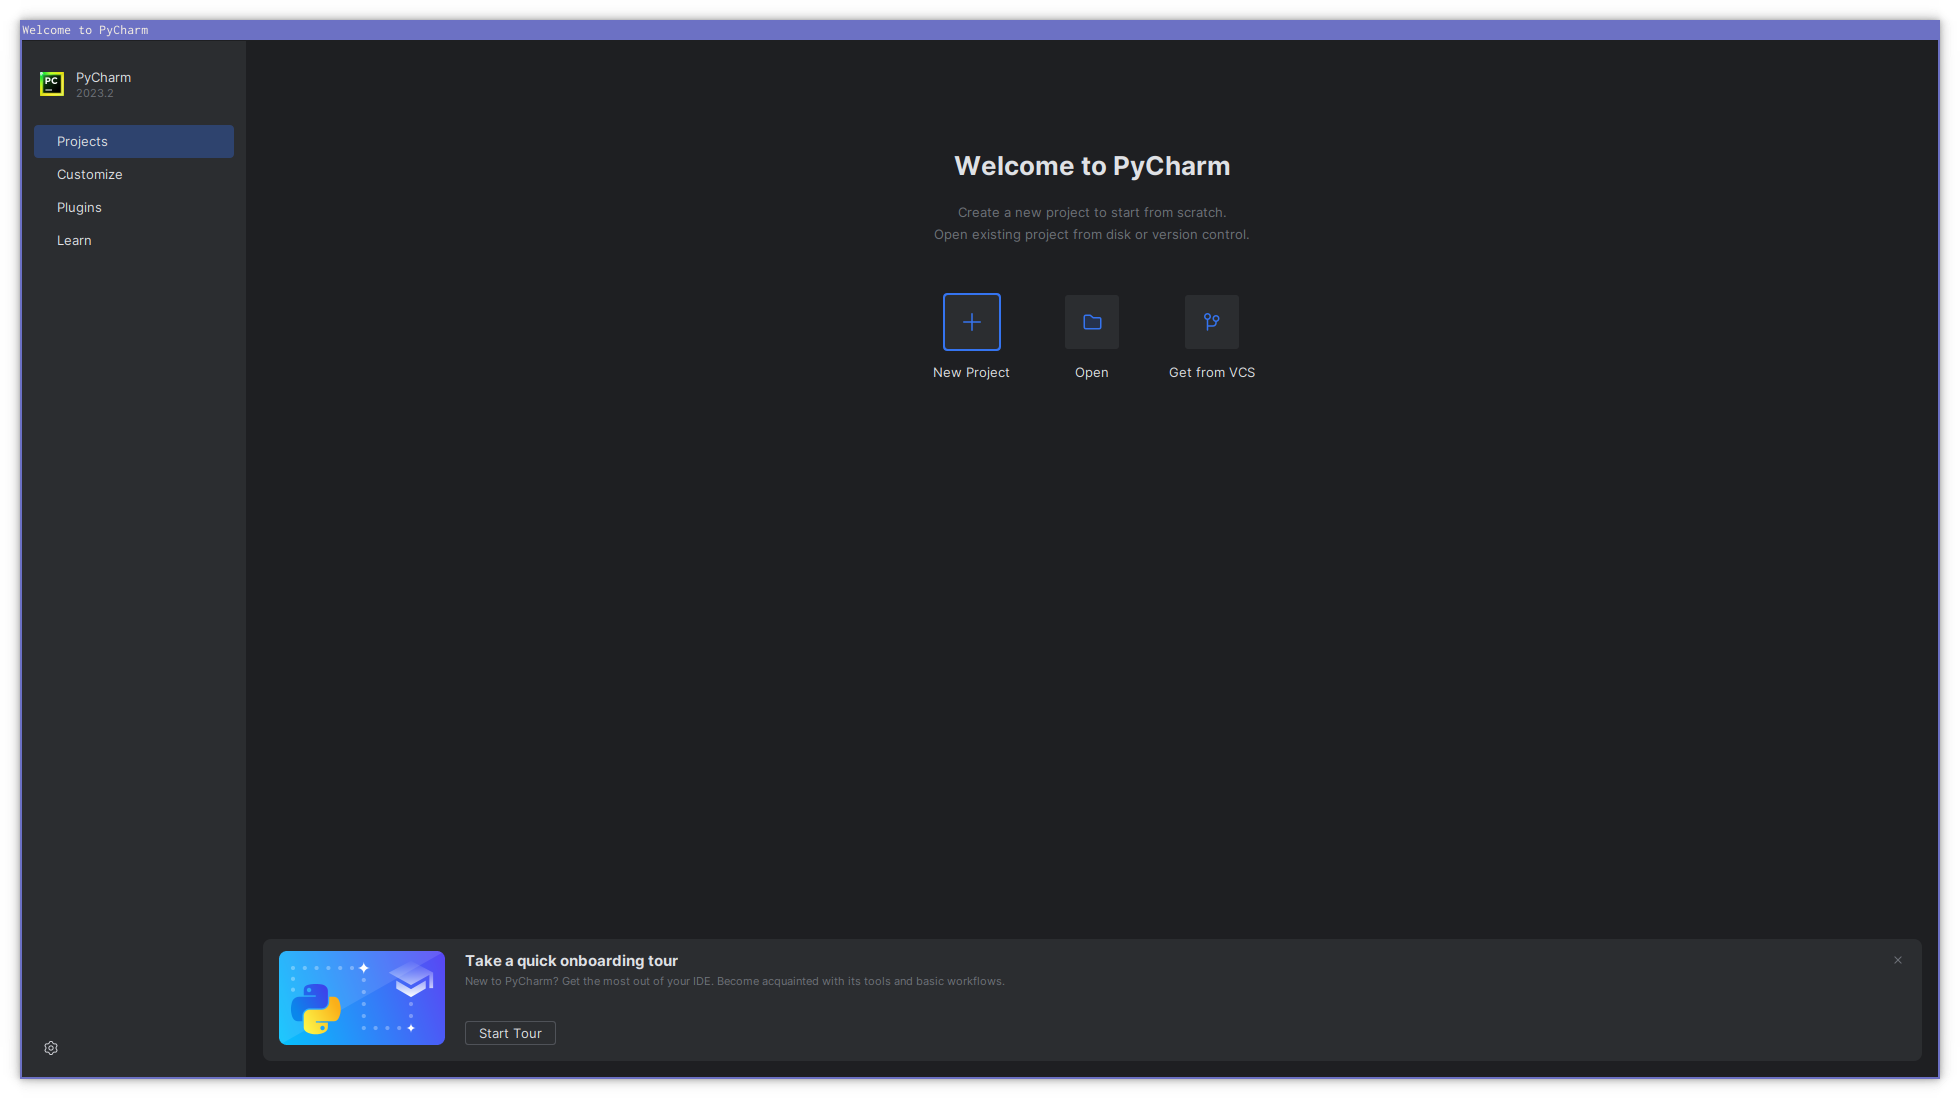 The PyCharm Project Screen